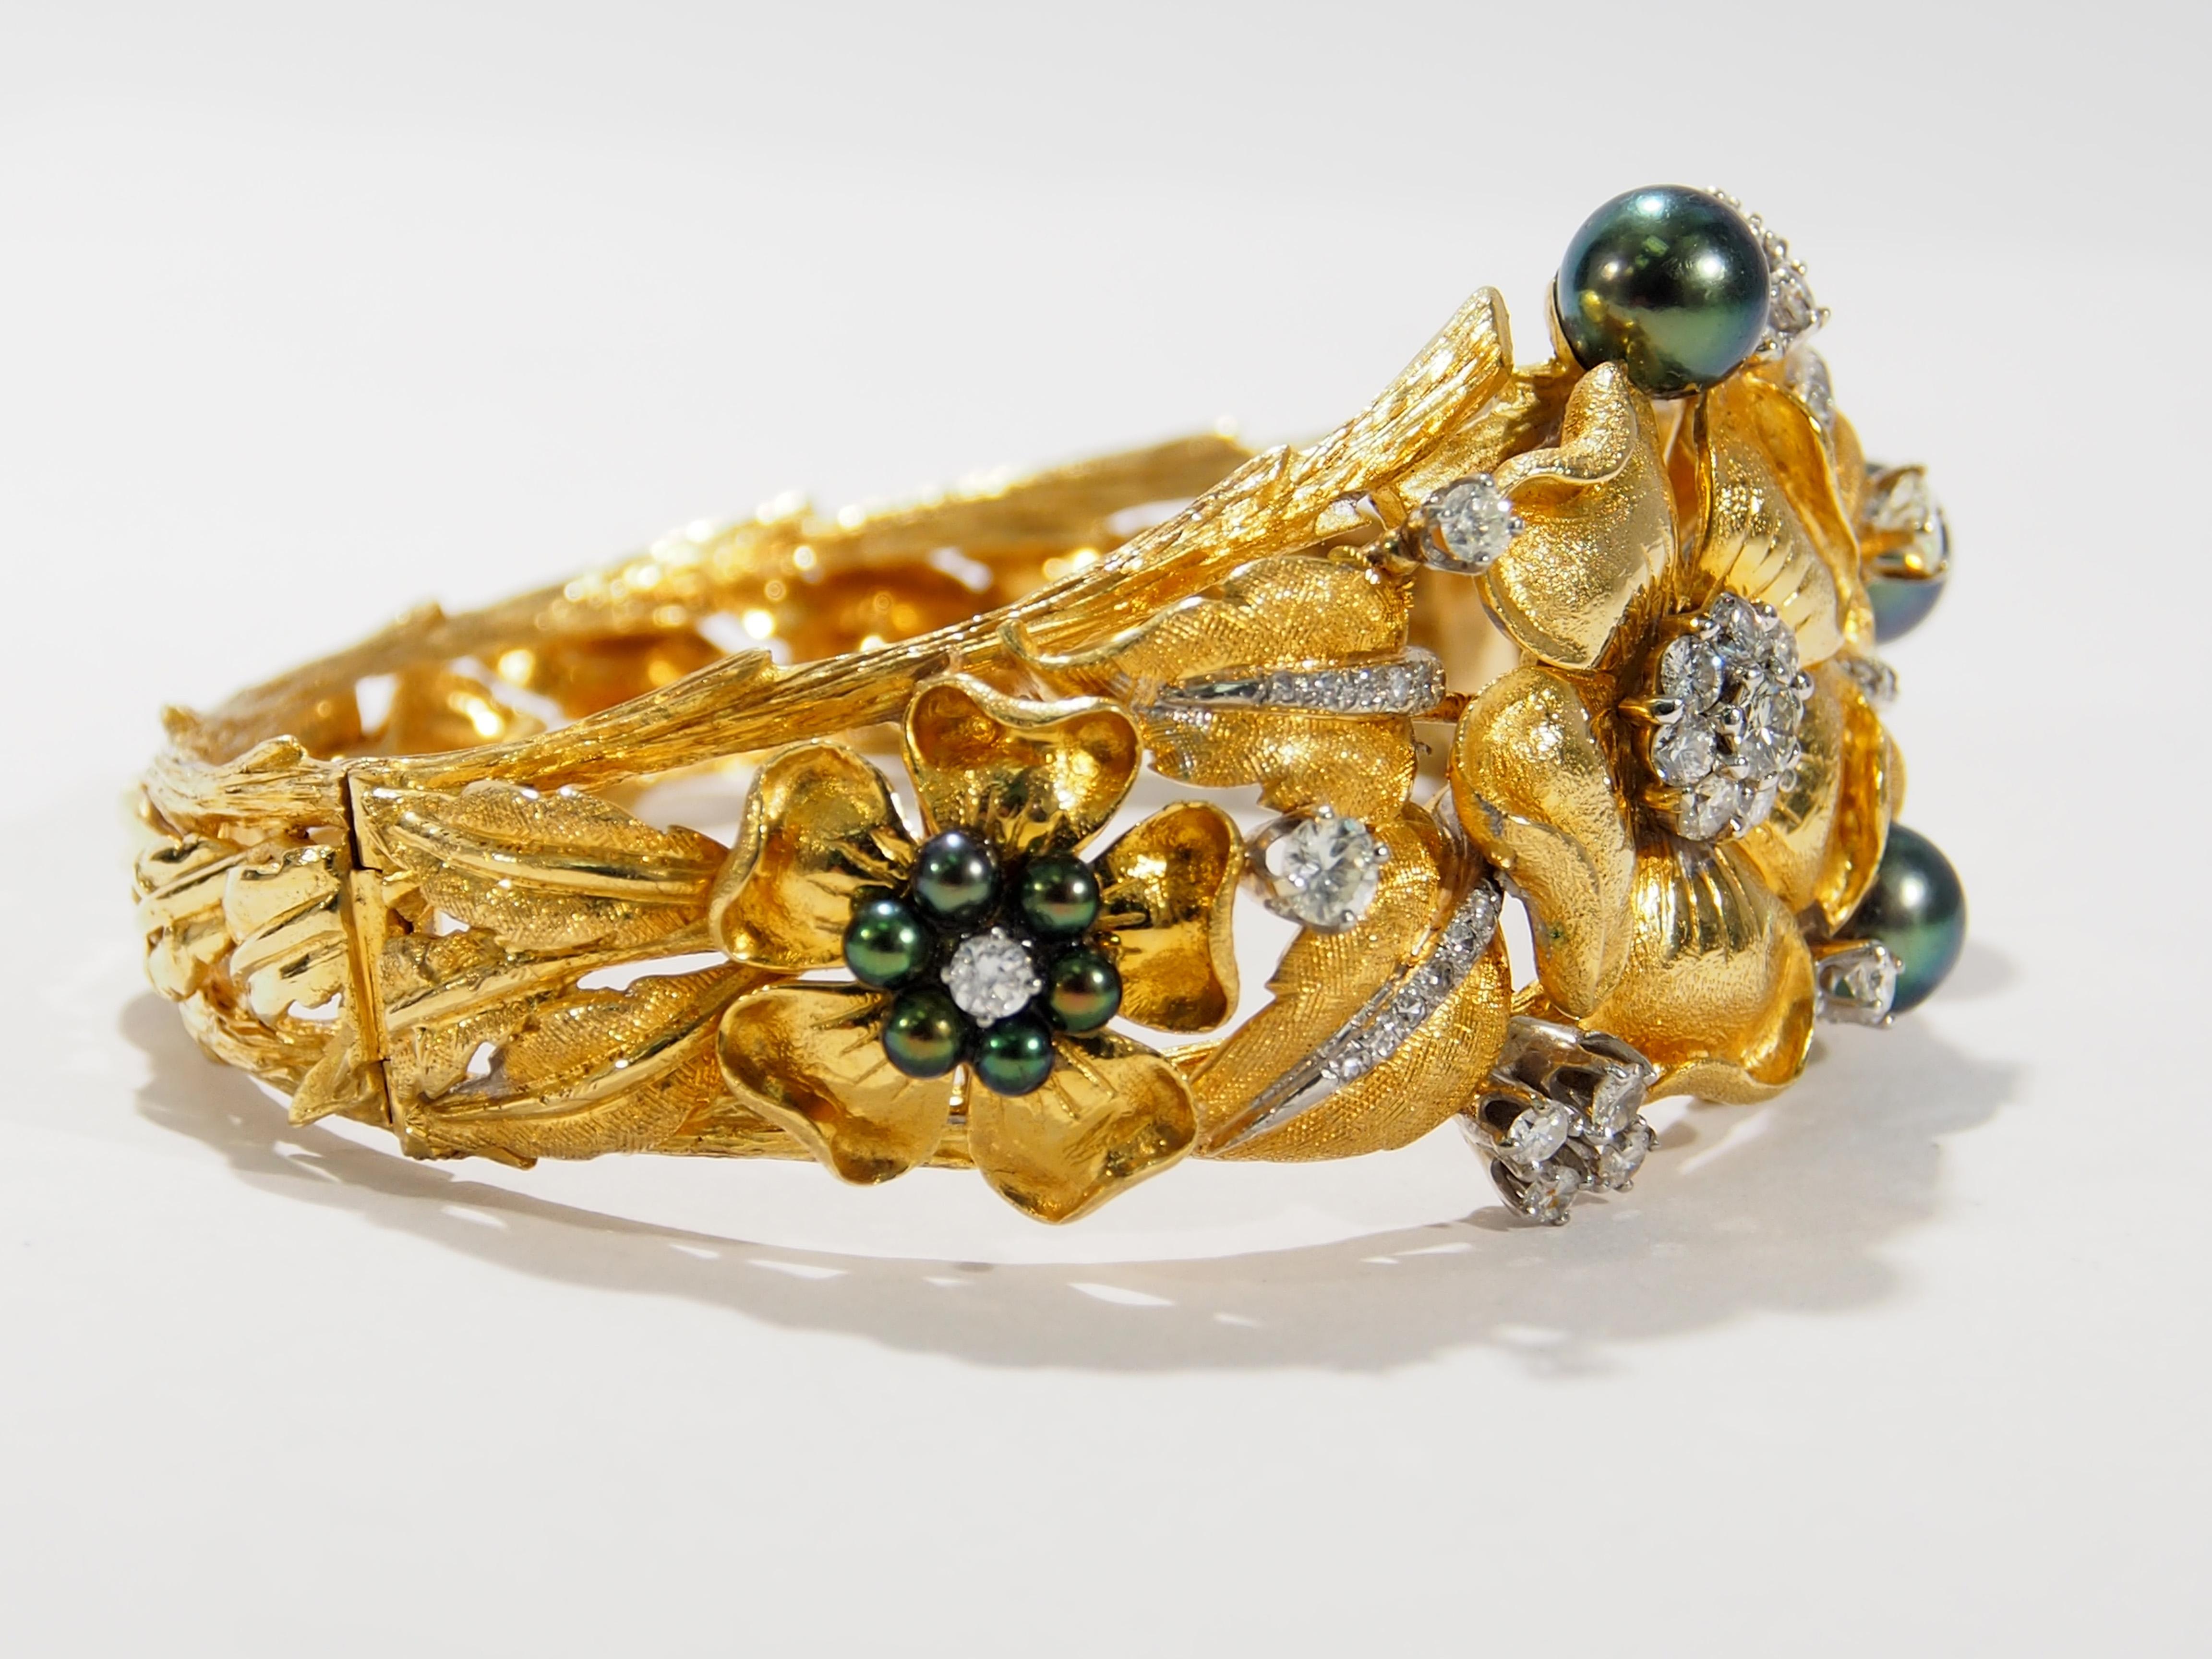 This is a stunning 18K Yellow Gold Bangle Bracelet fashioned in a nature's garden design. Surrounding the wrist are branches, leaves and flowers in exquisite detail. Enhancing the flowers are (68) Round Brilliant Cut Diamonds, approximately 2.11ctw,